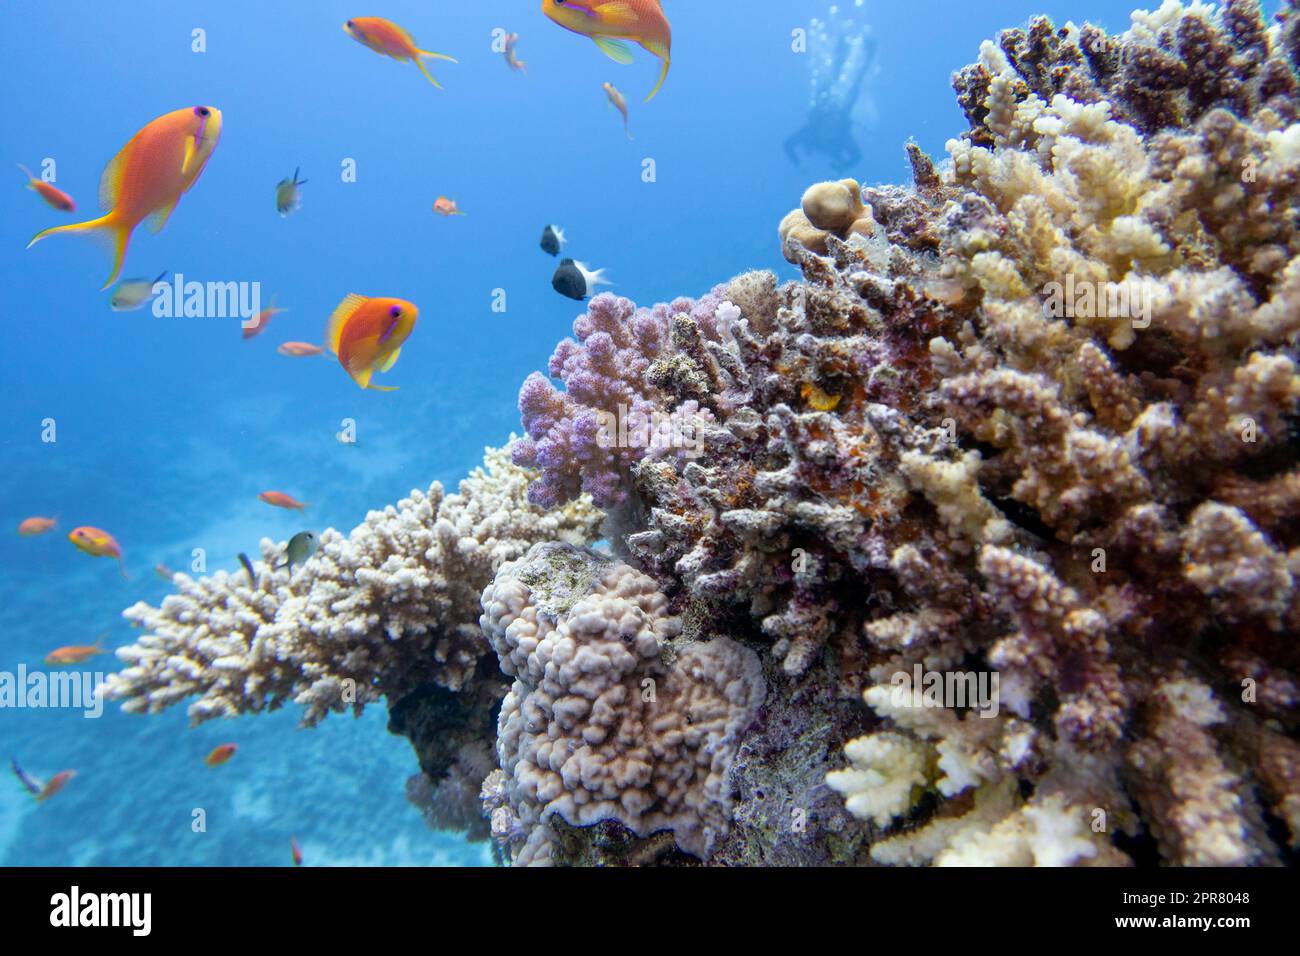 Colorful coral reef at the bottom of tropical sea, hard corals and fishes Anthias, underwater landscape Stock Photo